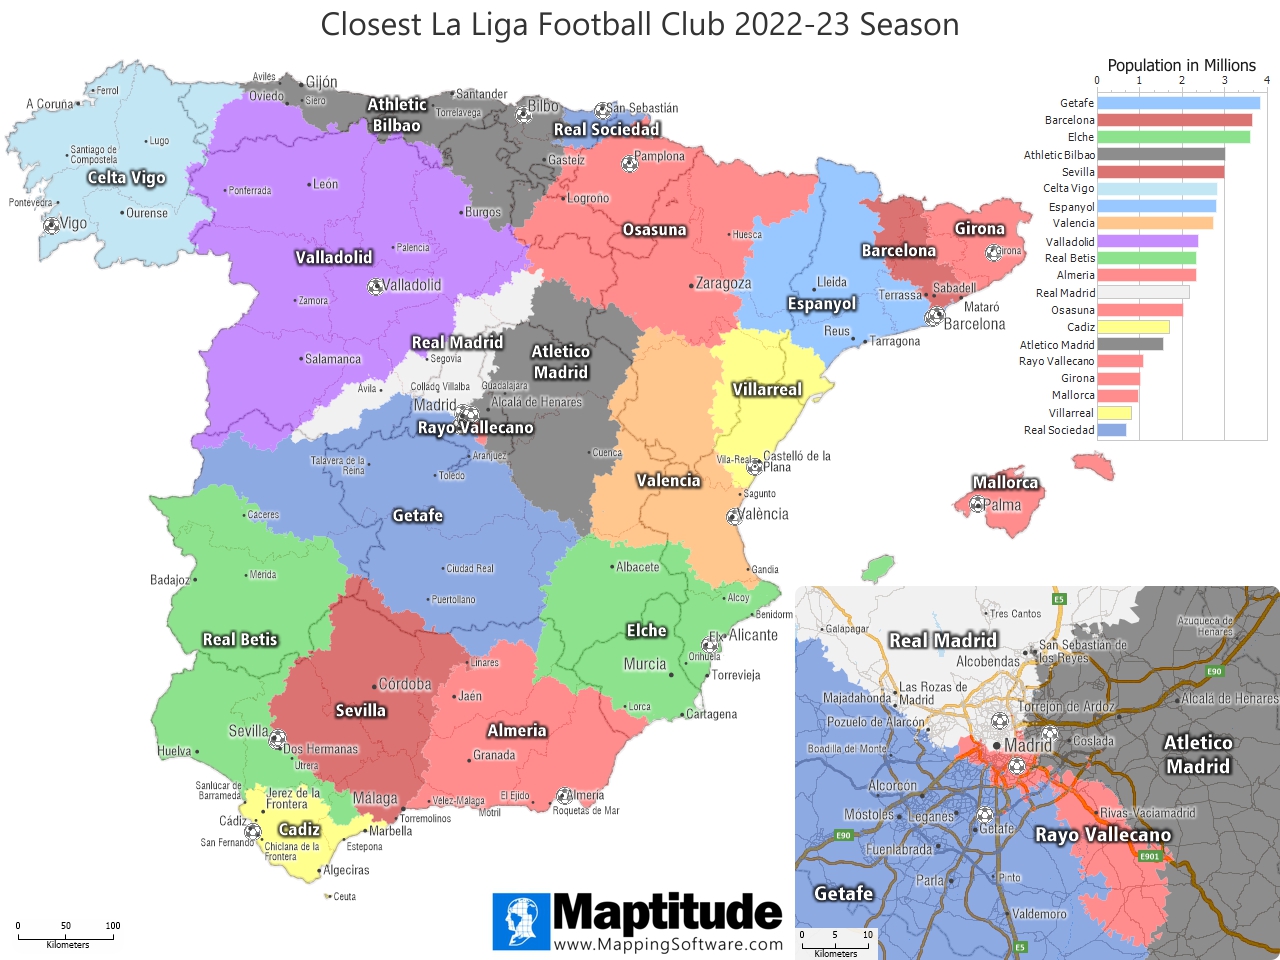 Maptitude mapping software infographic of Closest La Liga Football Club